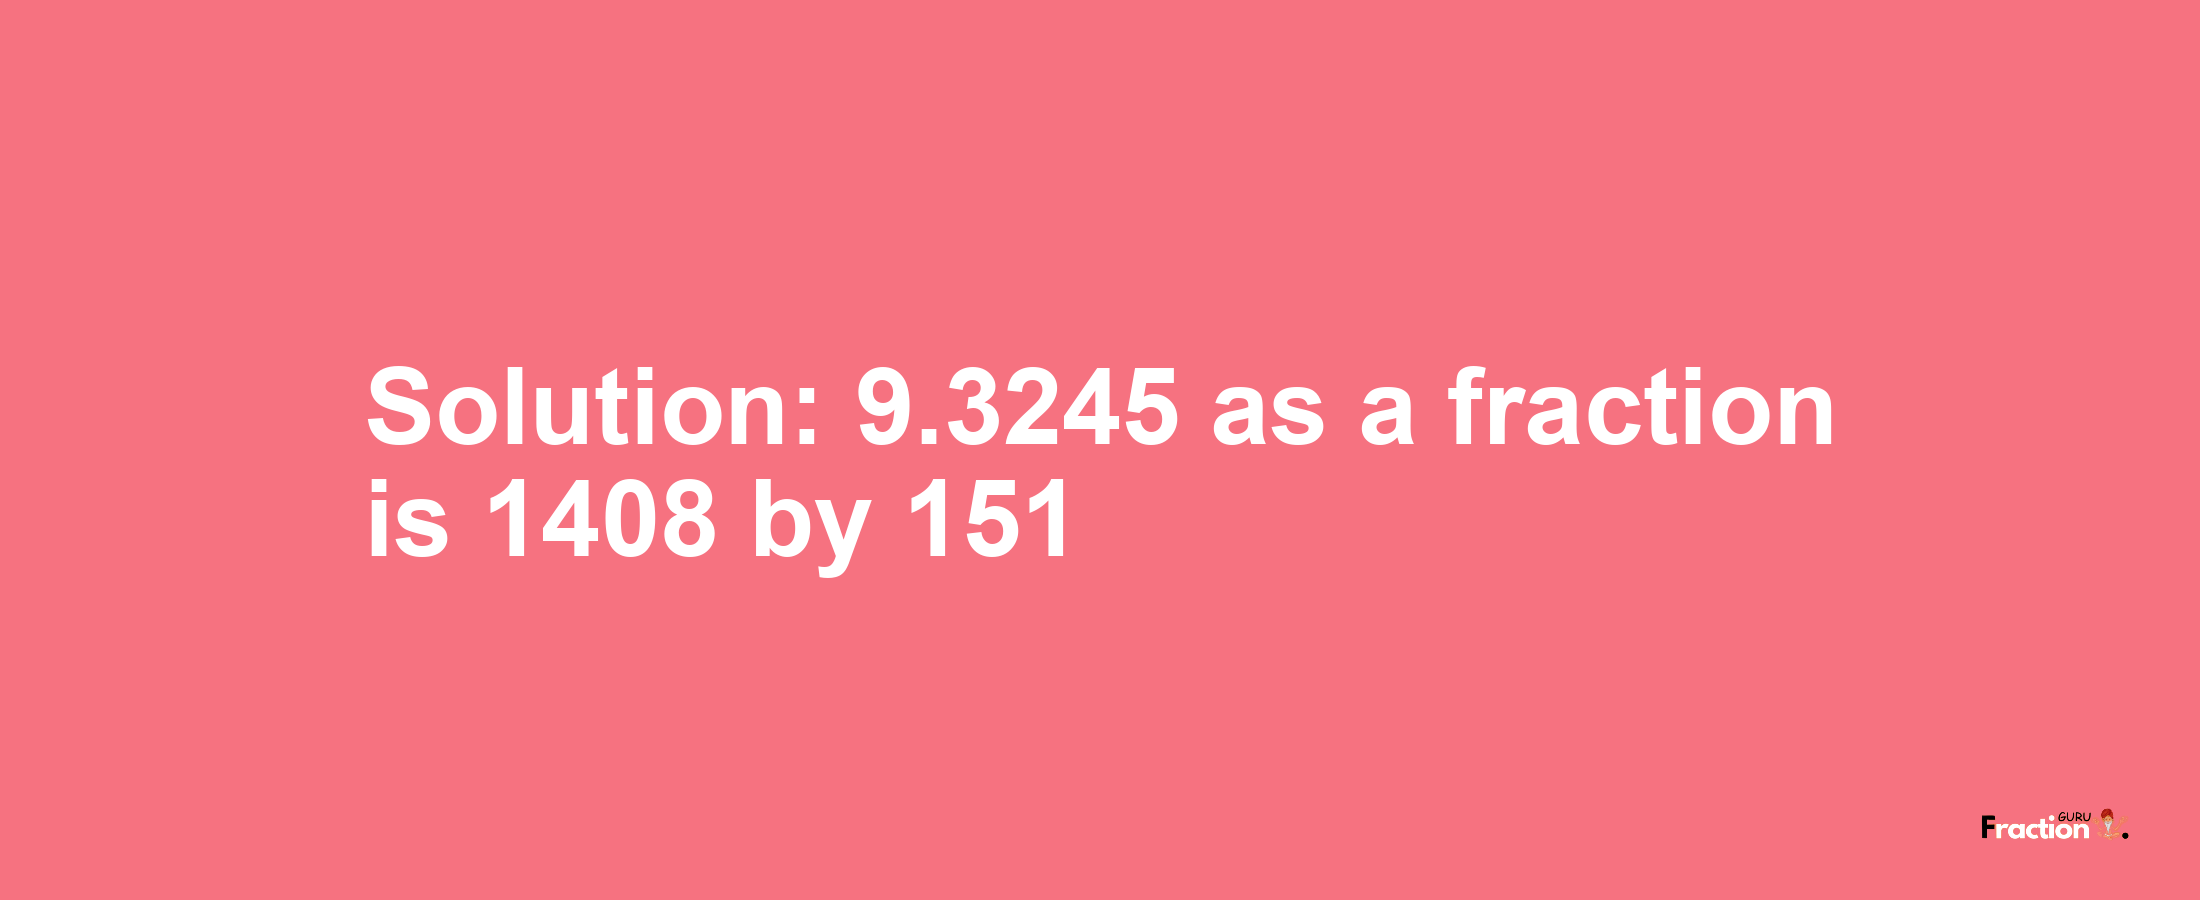 Solution:9.3245 as a fraction is 1408/151